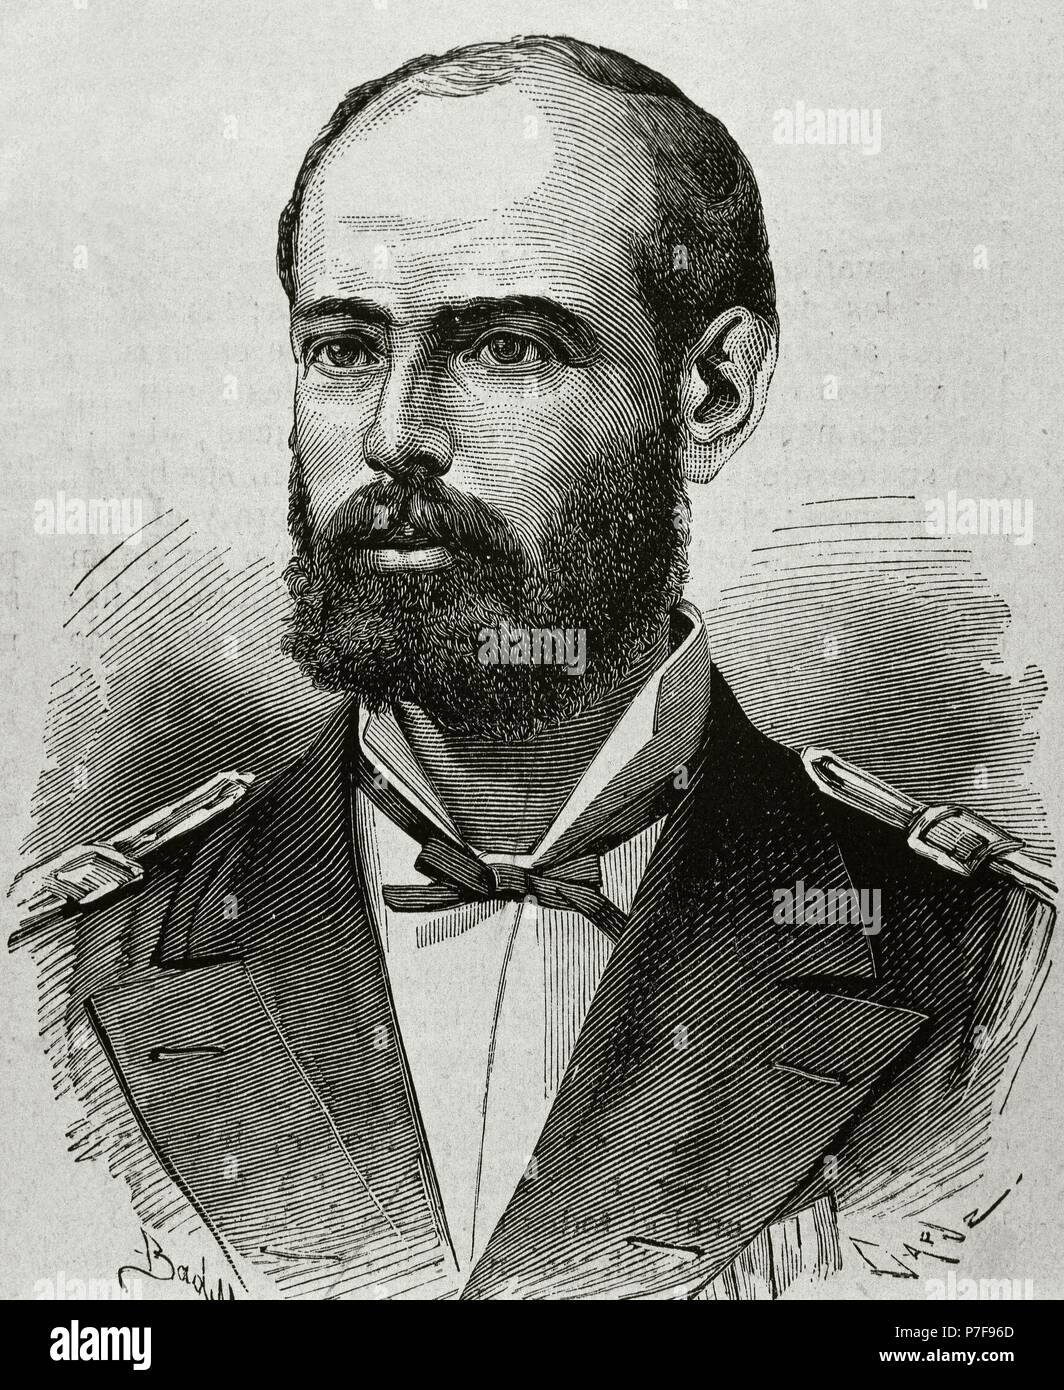 Arturo Prat (1848-1879). Chilean lawyer and navy officer. He died after boarding the Peruvian Huascar at the Naval Battle of Iquique after the ship under his command, the Esmeralda, was rammed. Portrait. Engraving by Capuz in "La Ilustracion Espanola y Americana". Stock Photo